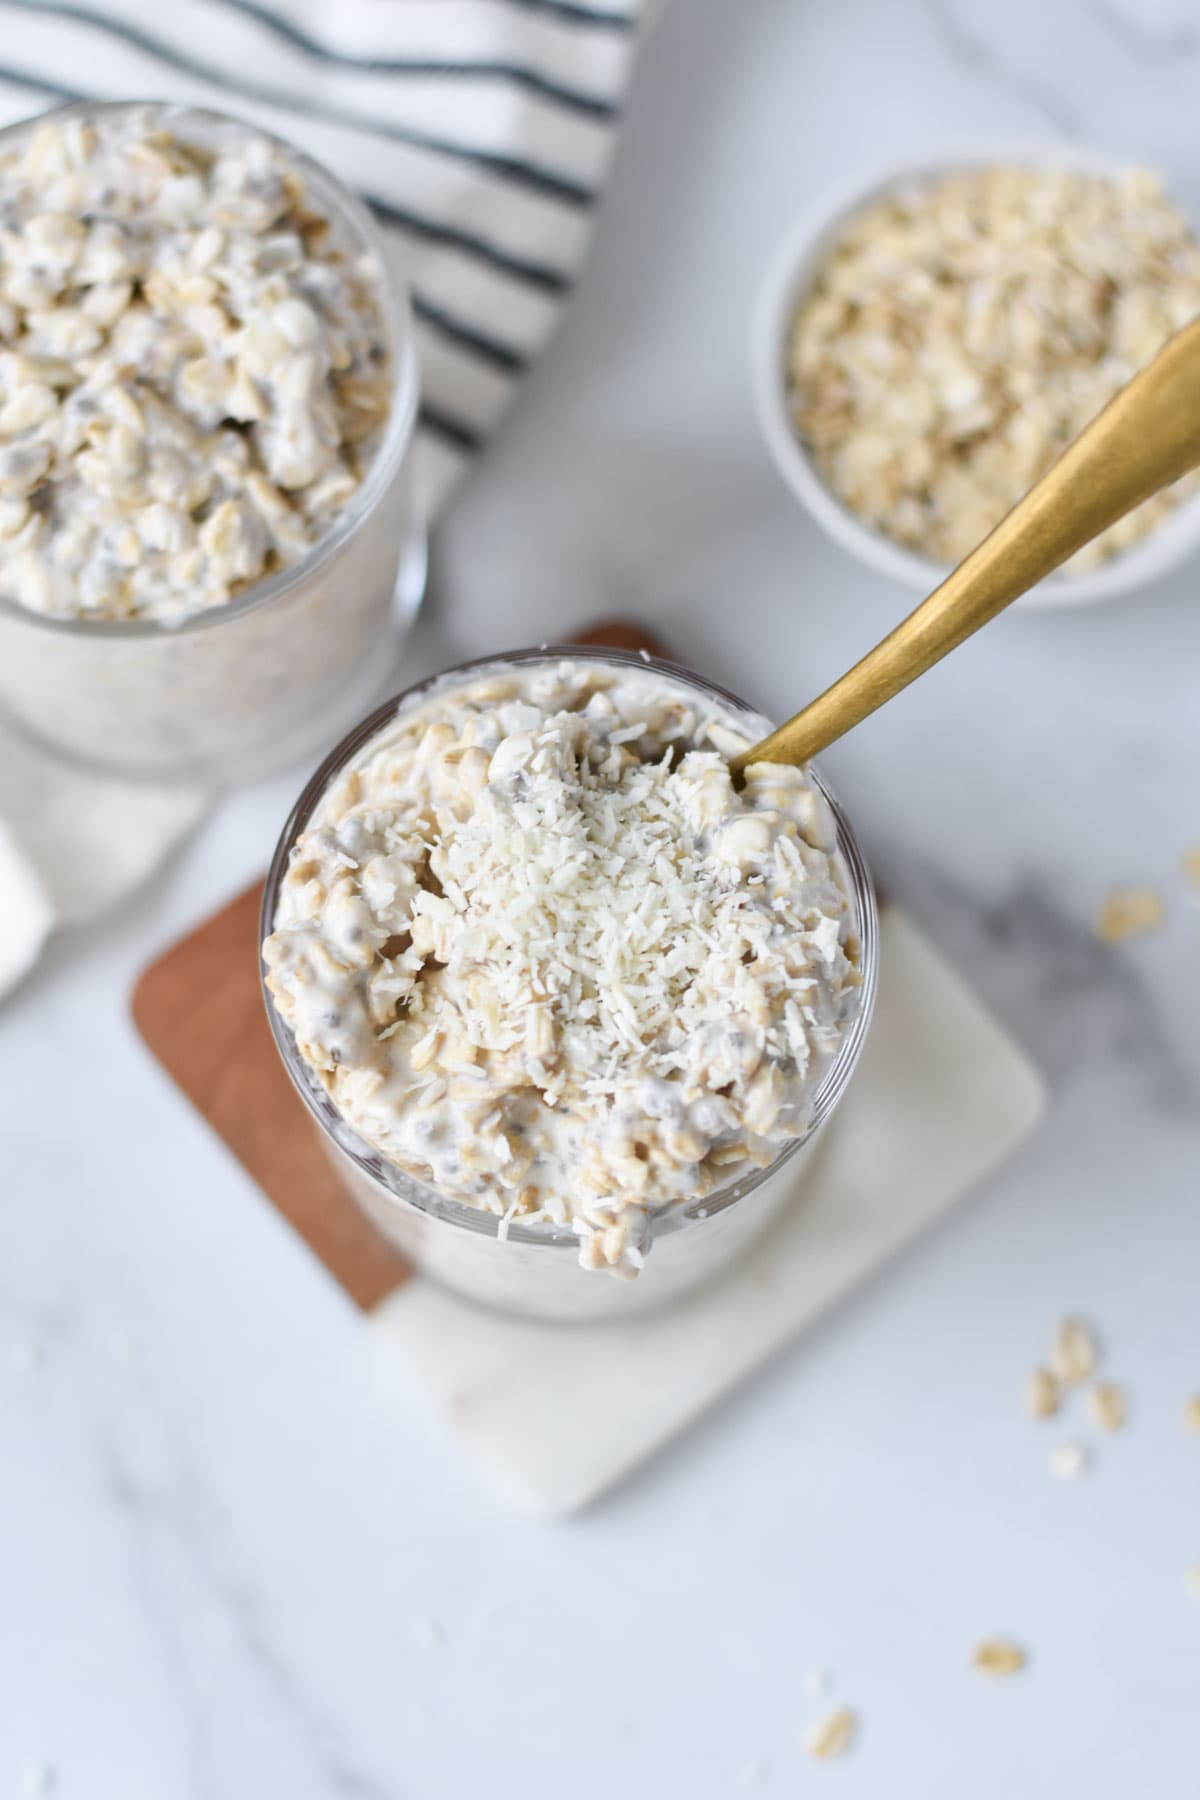 Overnight oats in jars with coconut and oats on a table.